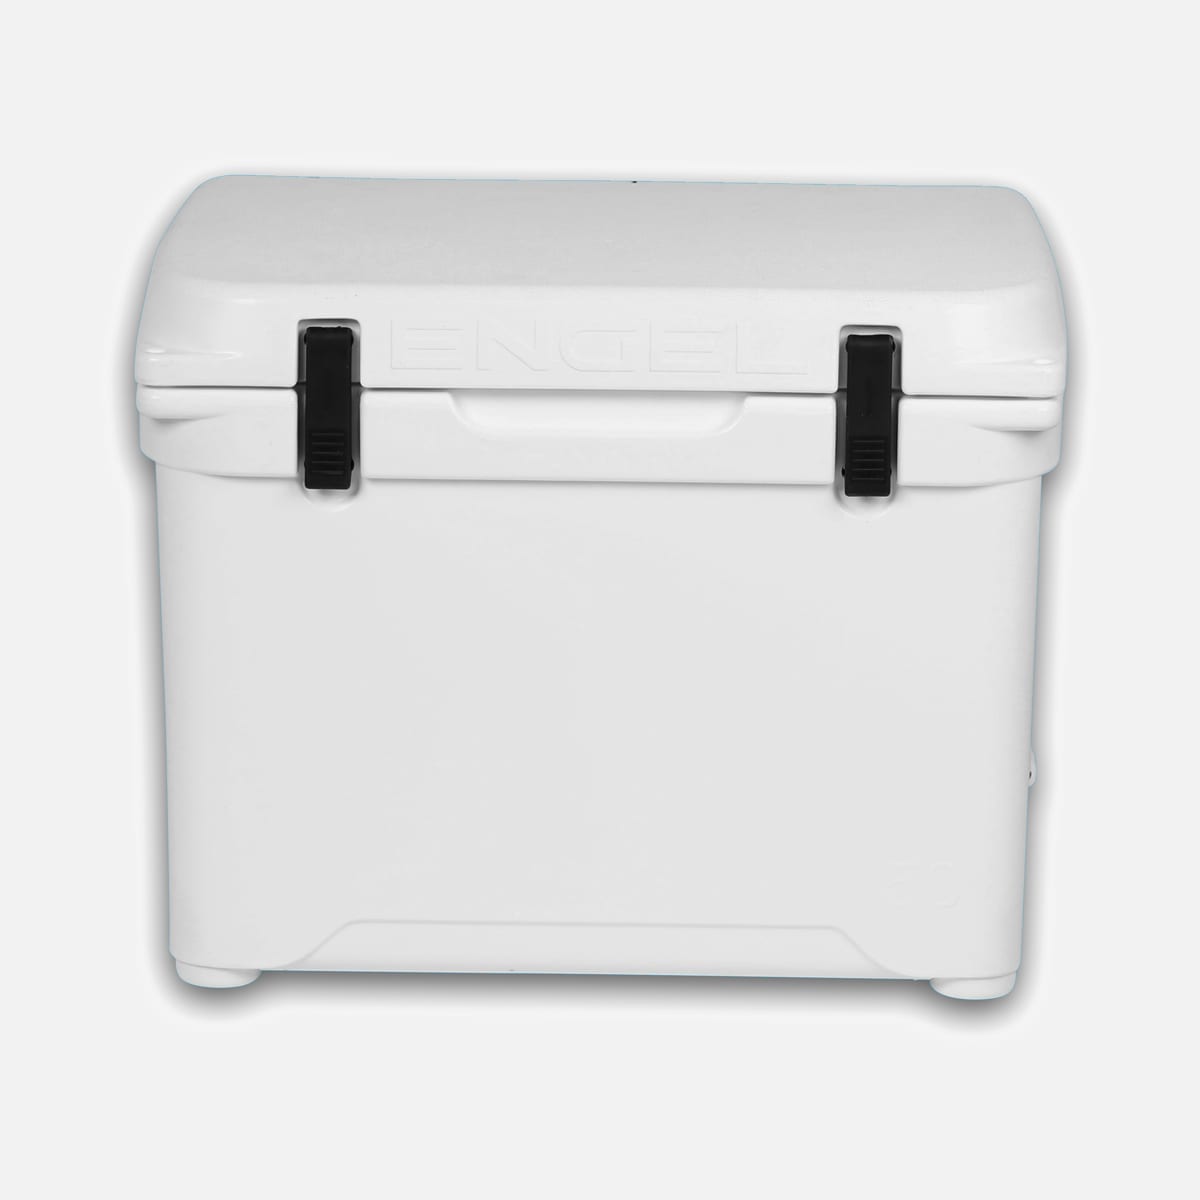 Engel Chilly Bin with a 50 Litre capacity.